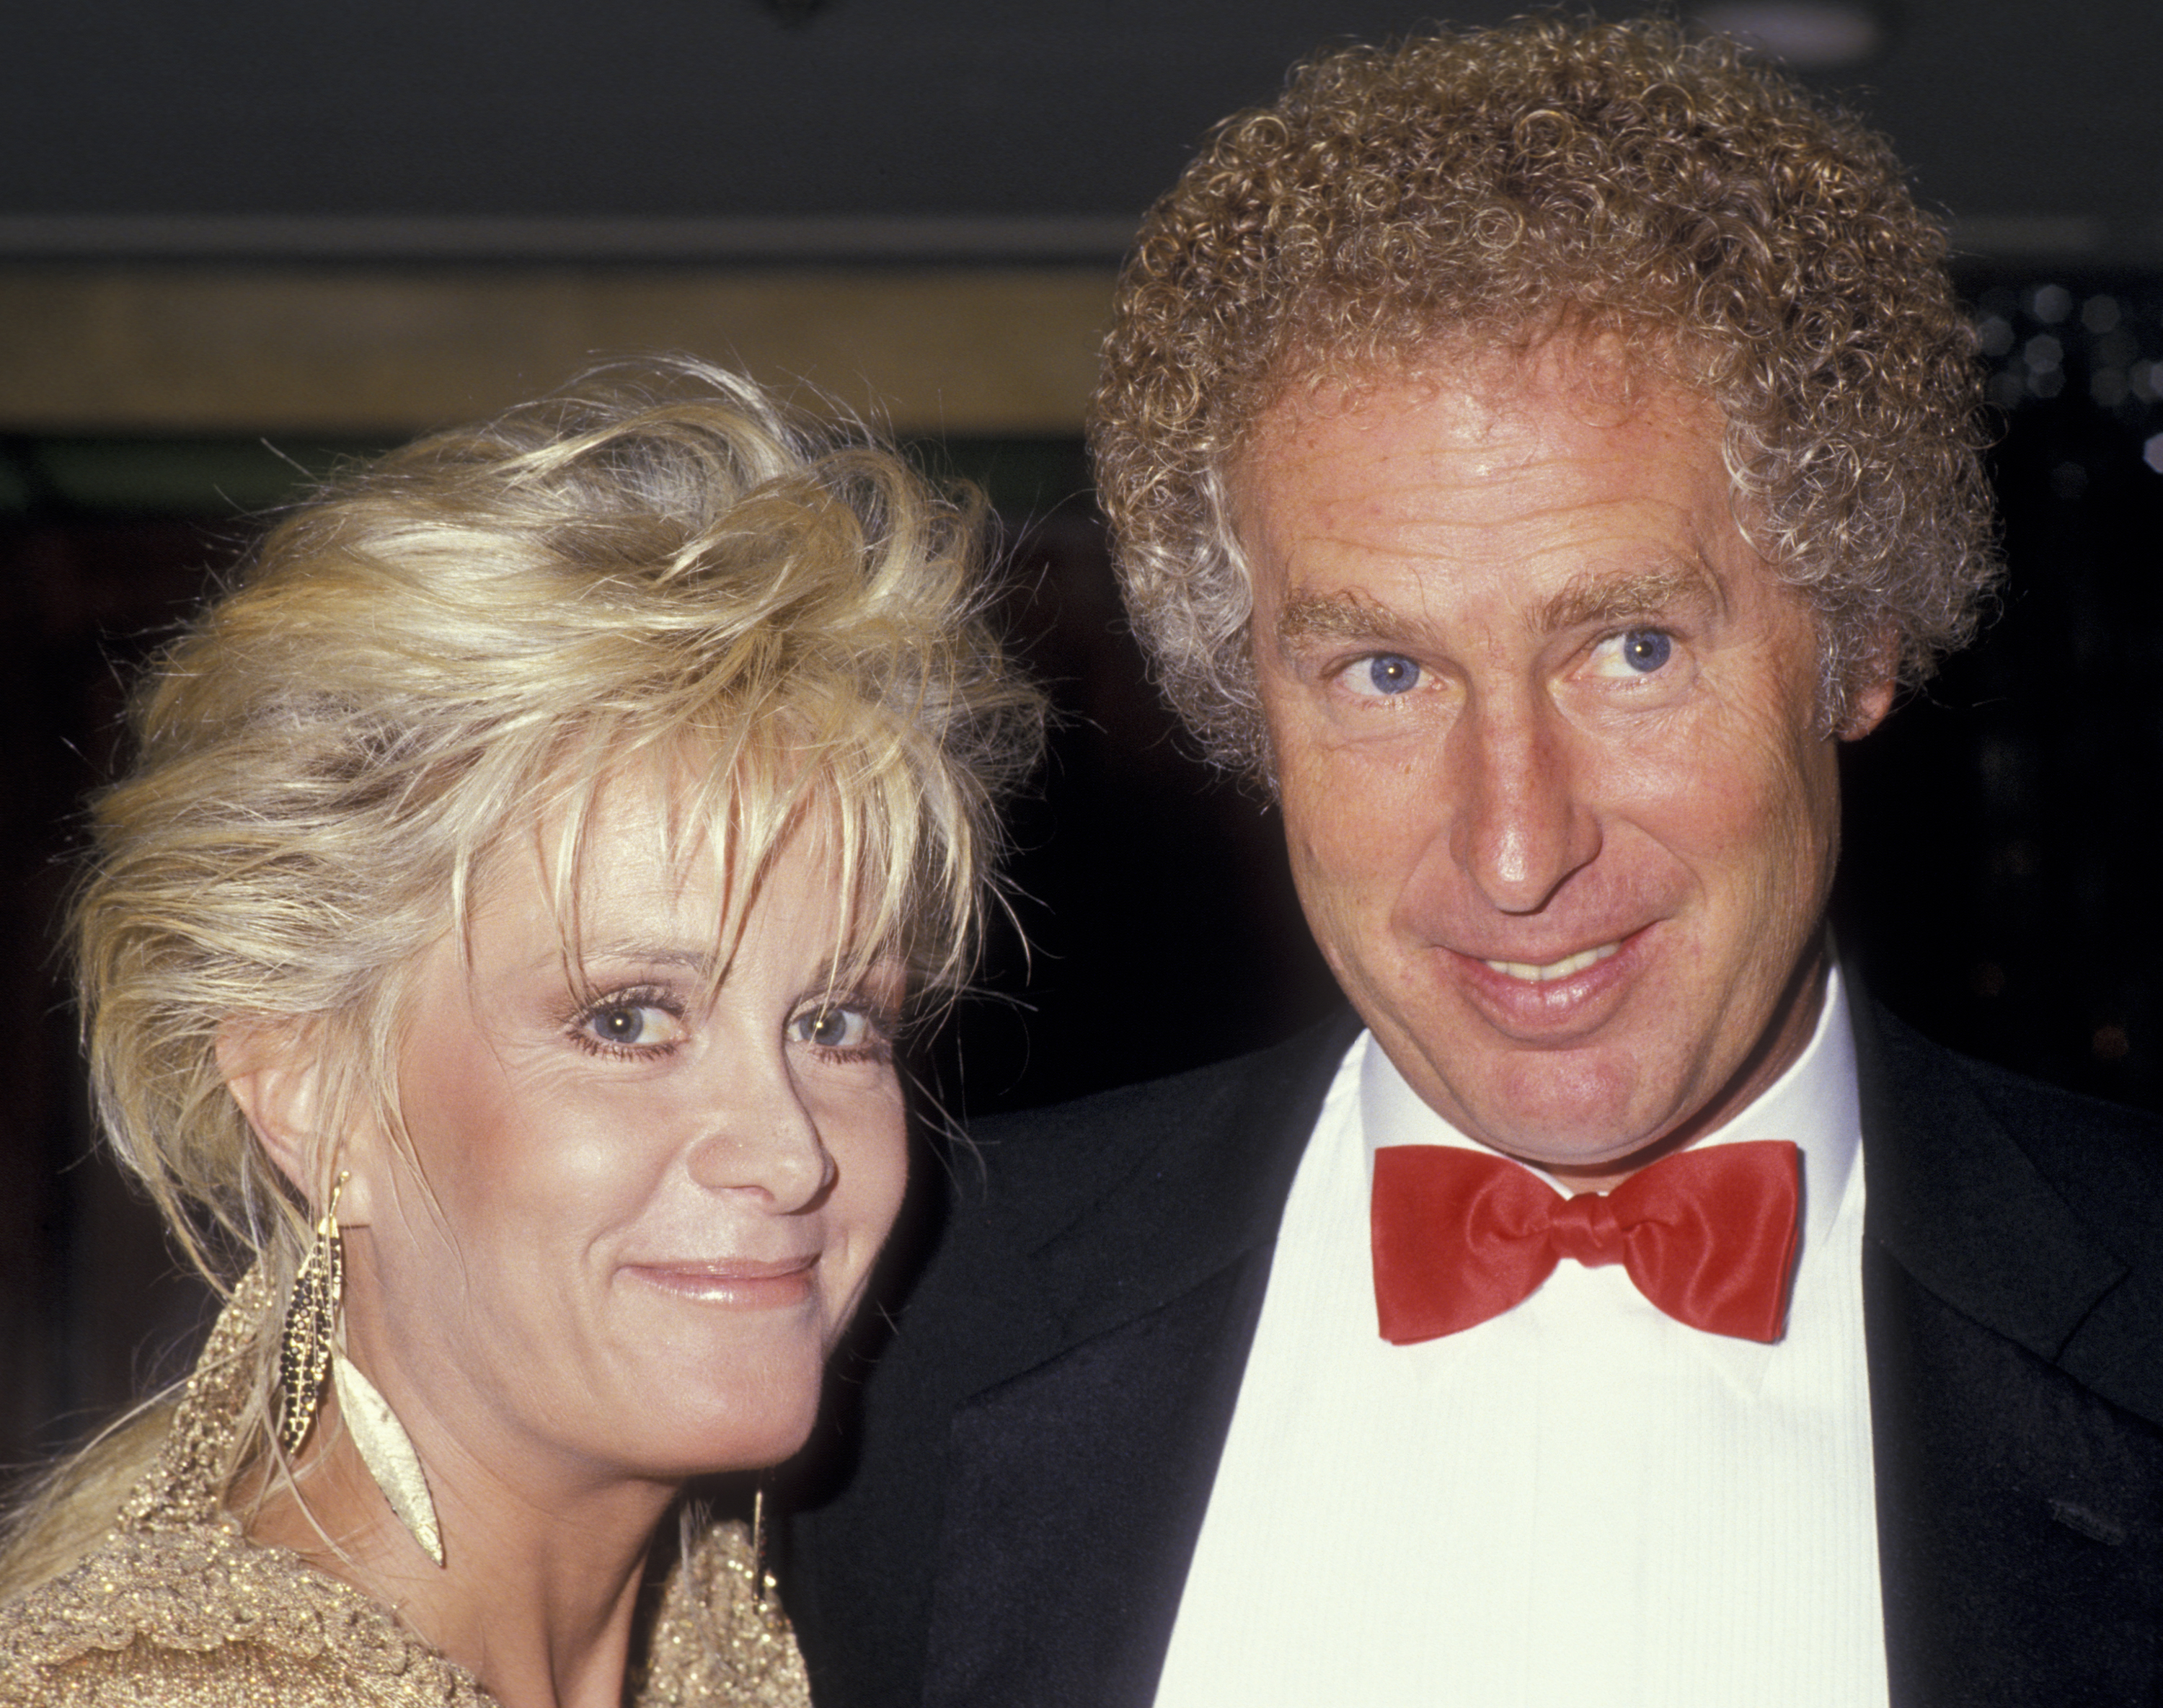 Joan Van Ark and John Marshall attend Thalians Ball on October 17, 1987 at the Century Plaza Hotel in Century City, California. | Source: Getty Images